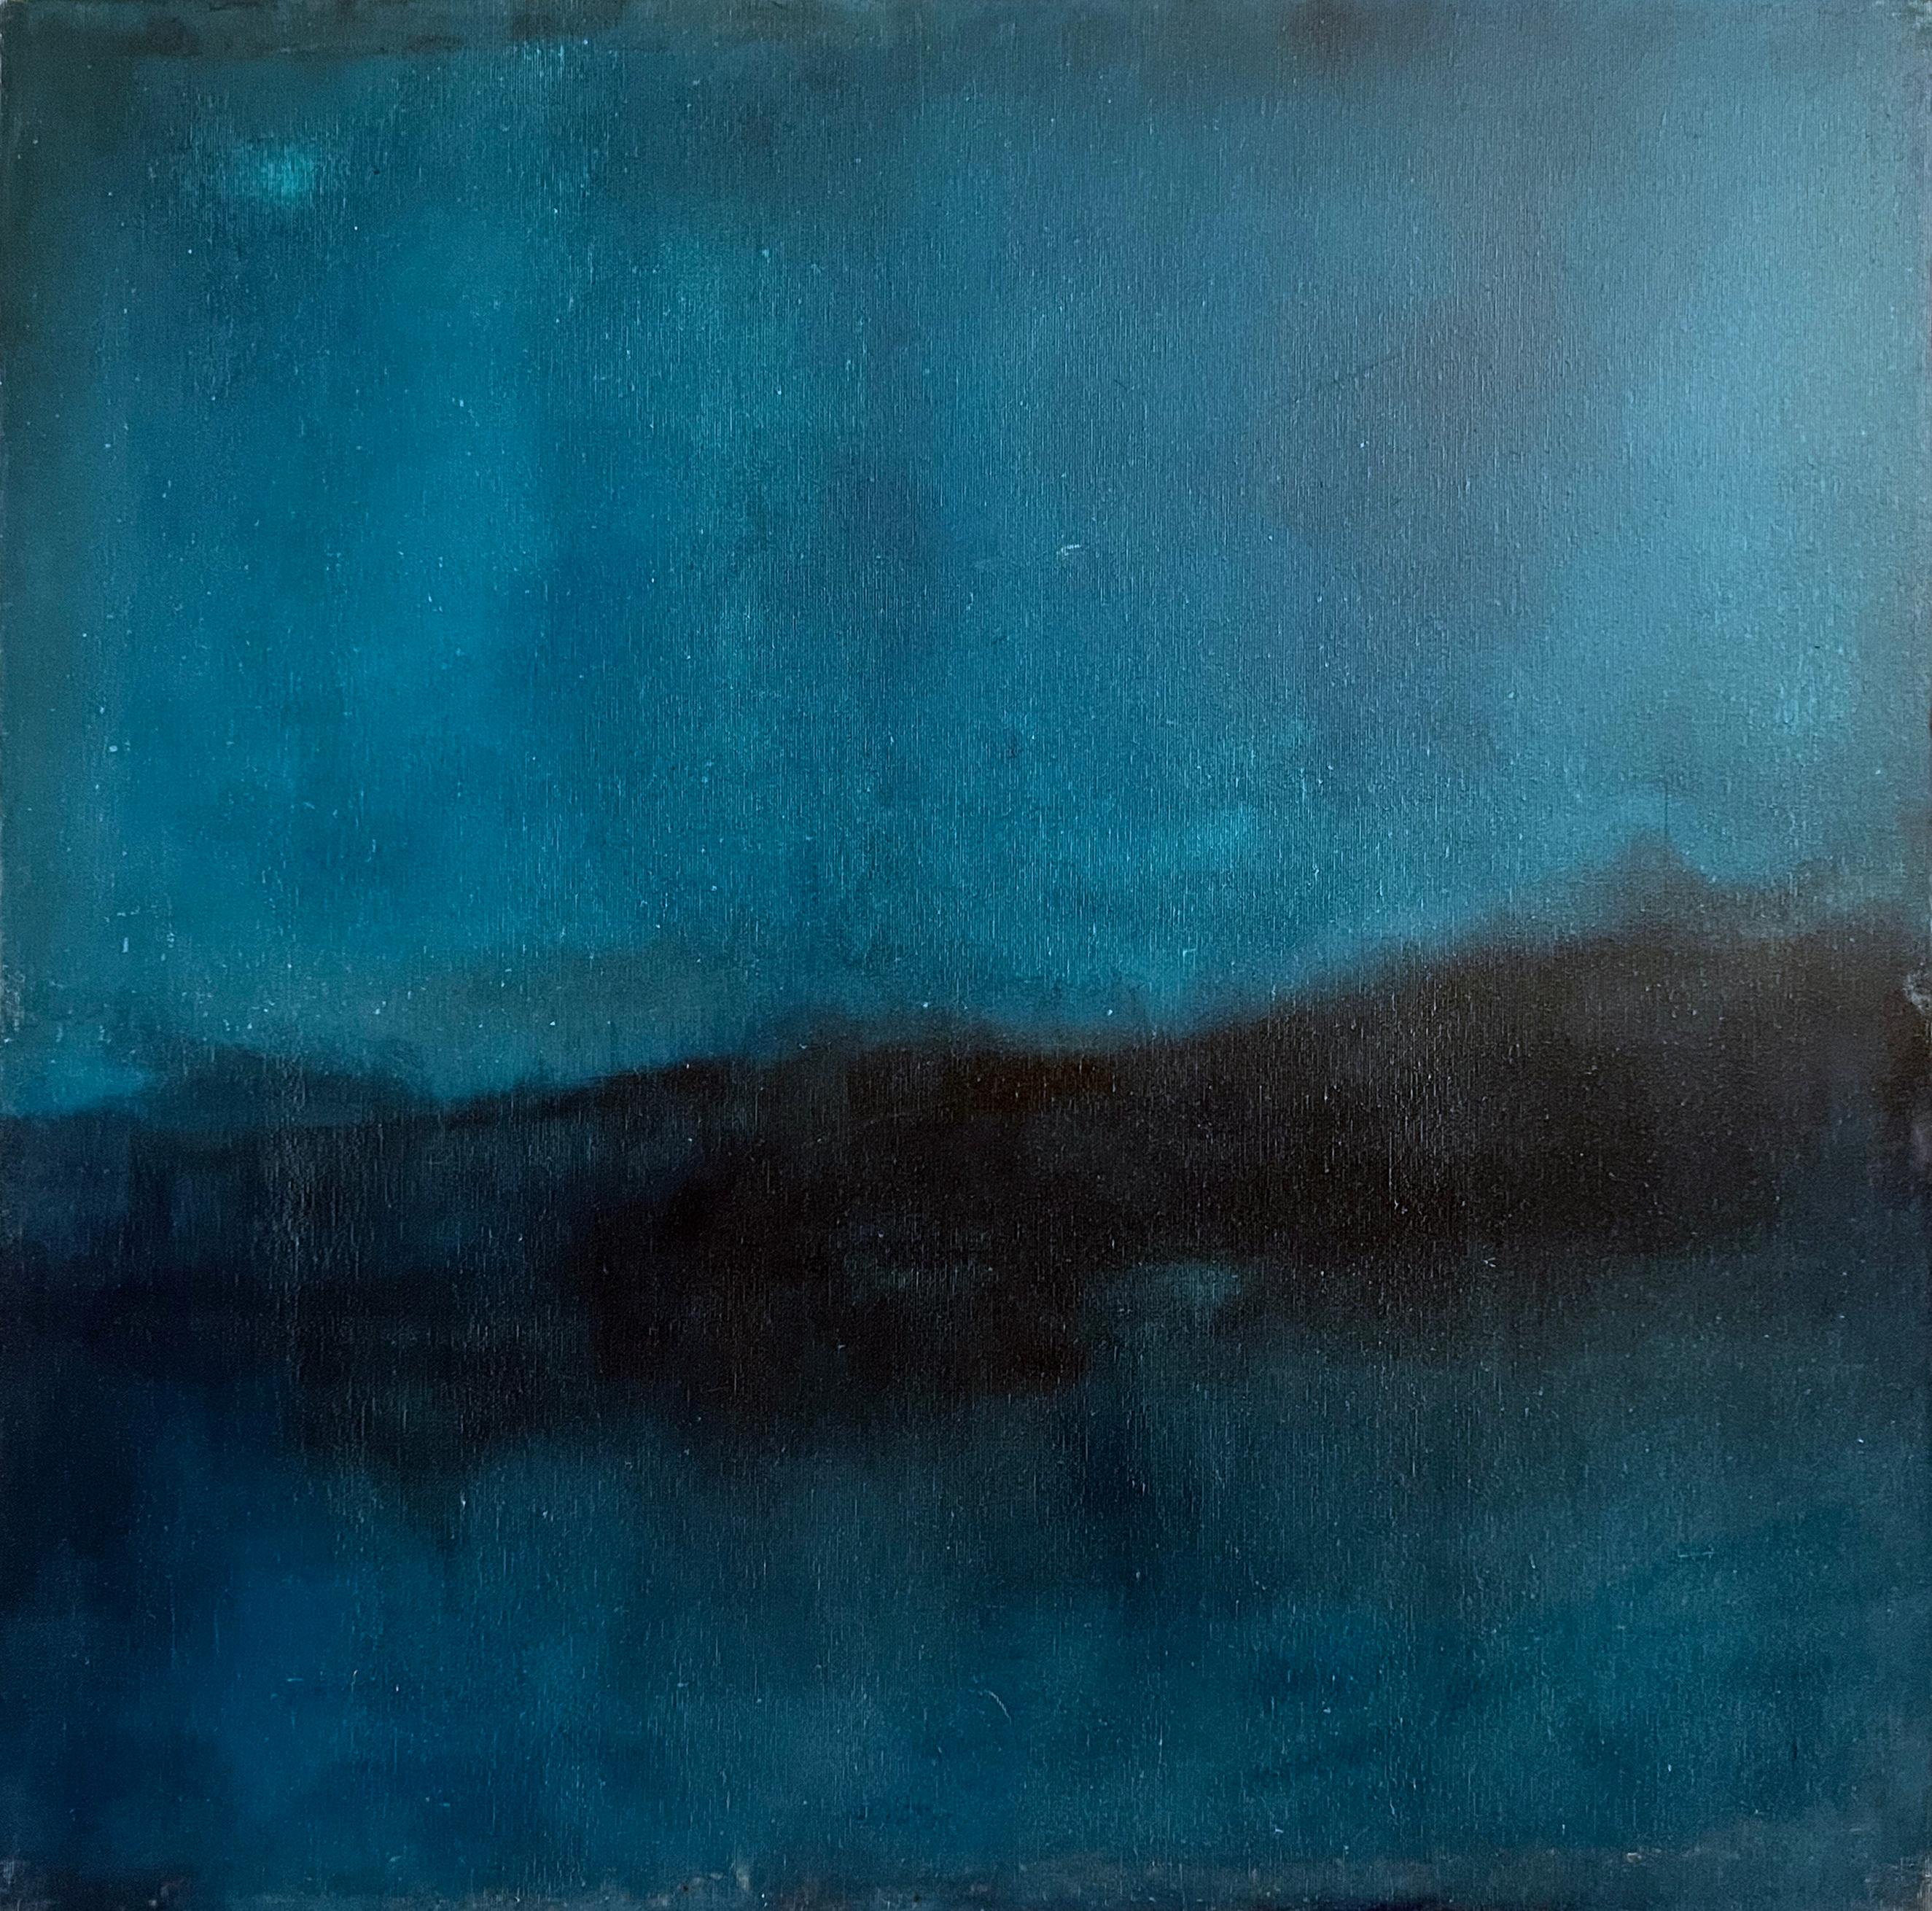 Landscape
oil on canvas 
80x80 cm -
Original Art
READY TO HANG


Marilina Marchica, born in 1984, was born in Agrigento, where she lives and works. She graduated in Painting at the Academy of Fine Arts in Bologna and at the Polytechnic University of